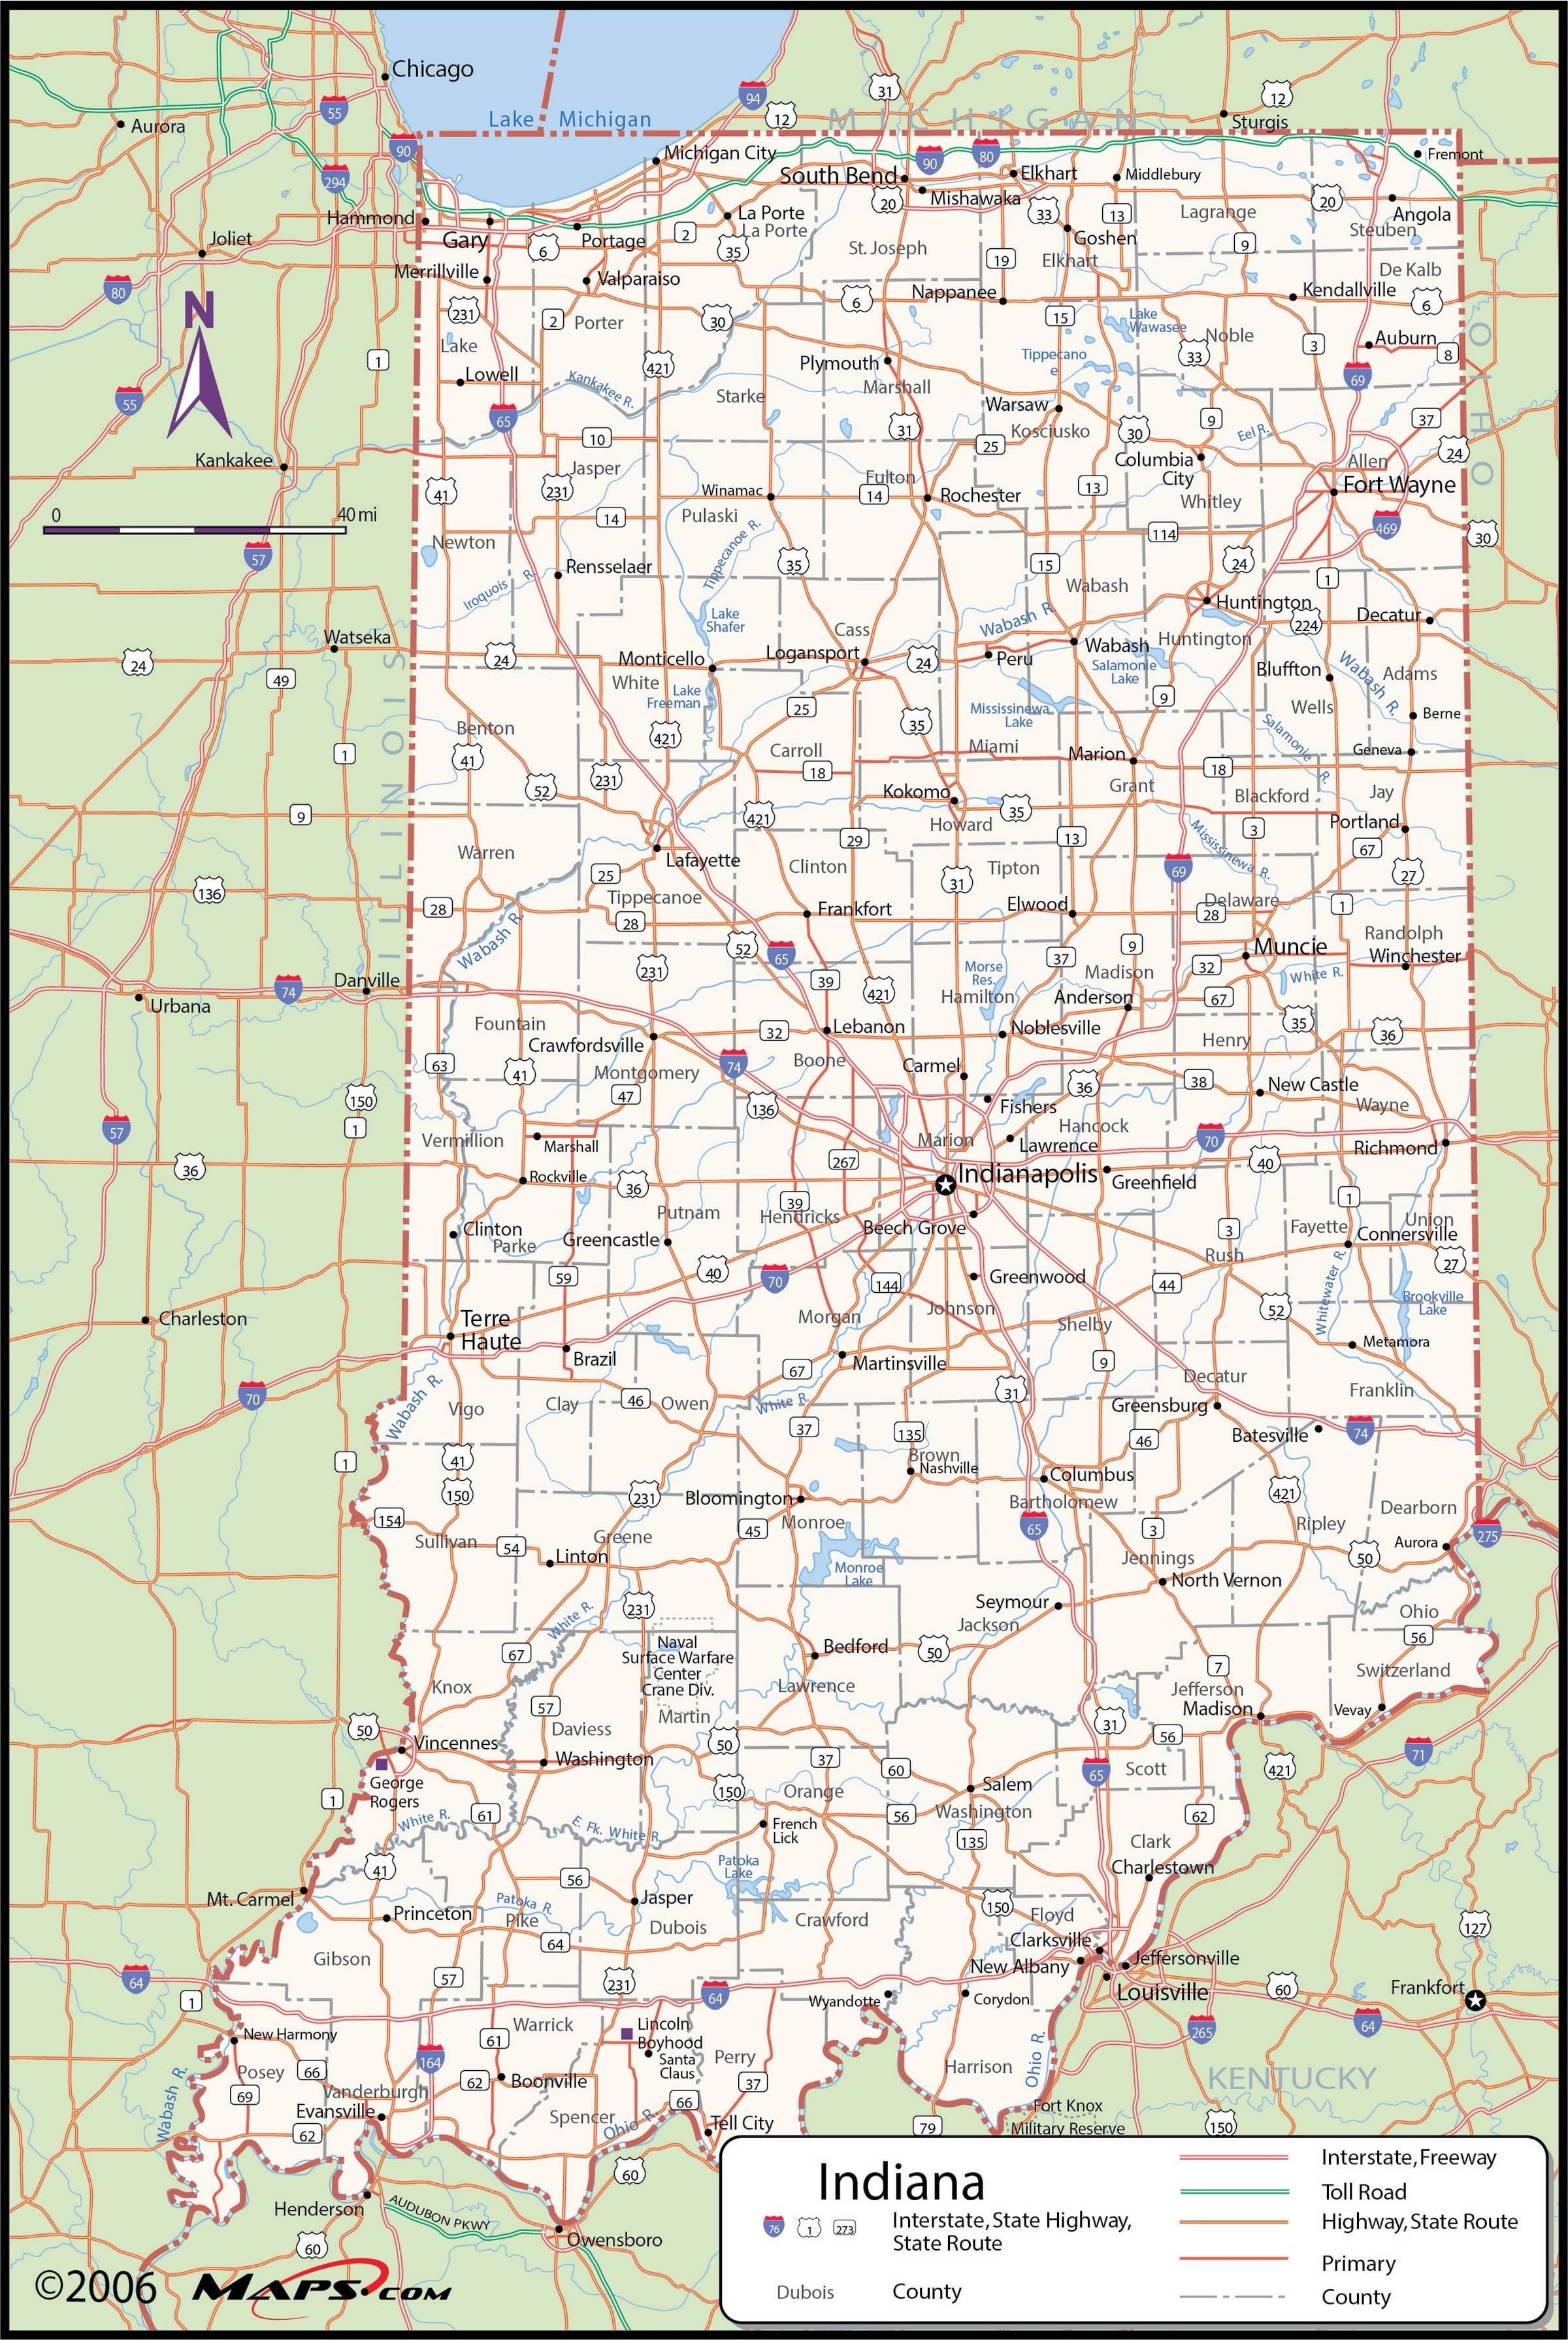 Indiana County Map With Towns Indiana County Wall Map | Maps.com.com